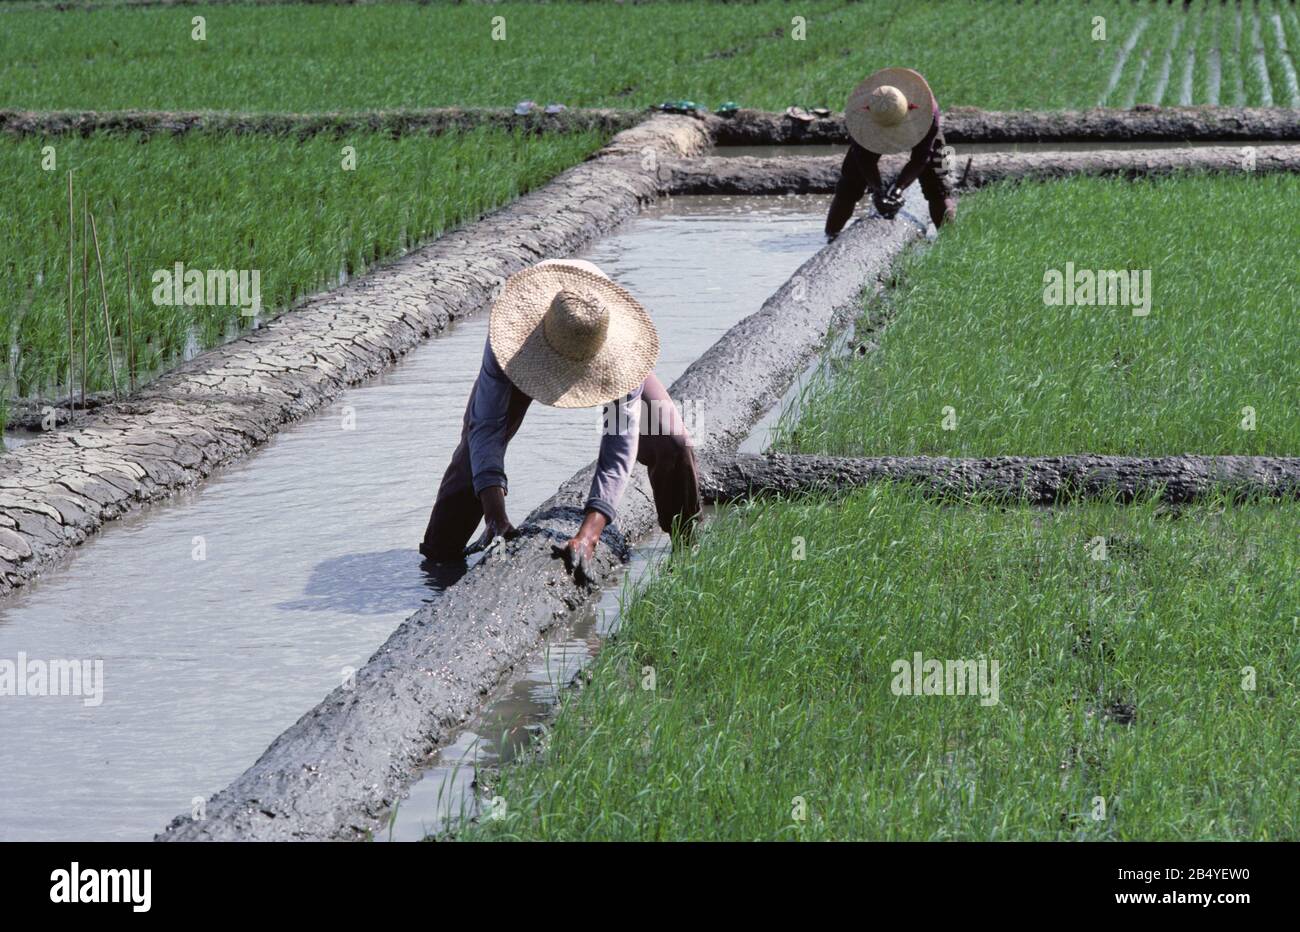 Workers repairing mud irrigation levies for small individual, experimental, trials plots in paddy rice (Oryza sativa), Luzon, Philippines Stock Photo